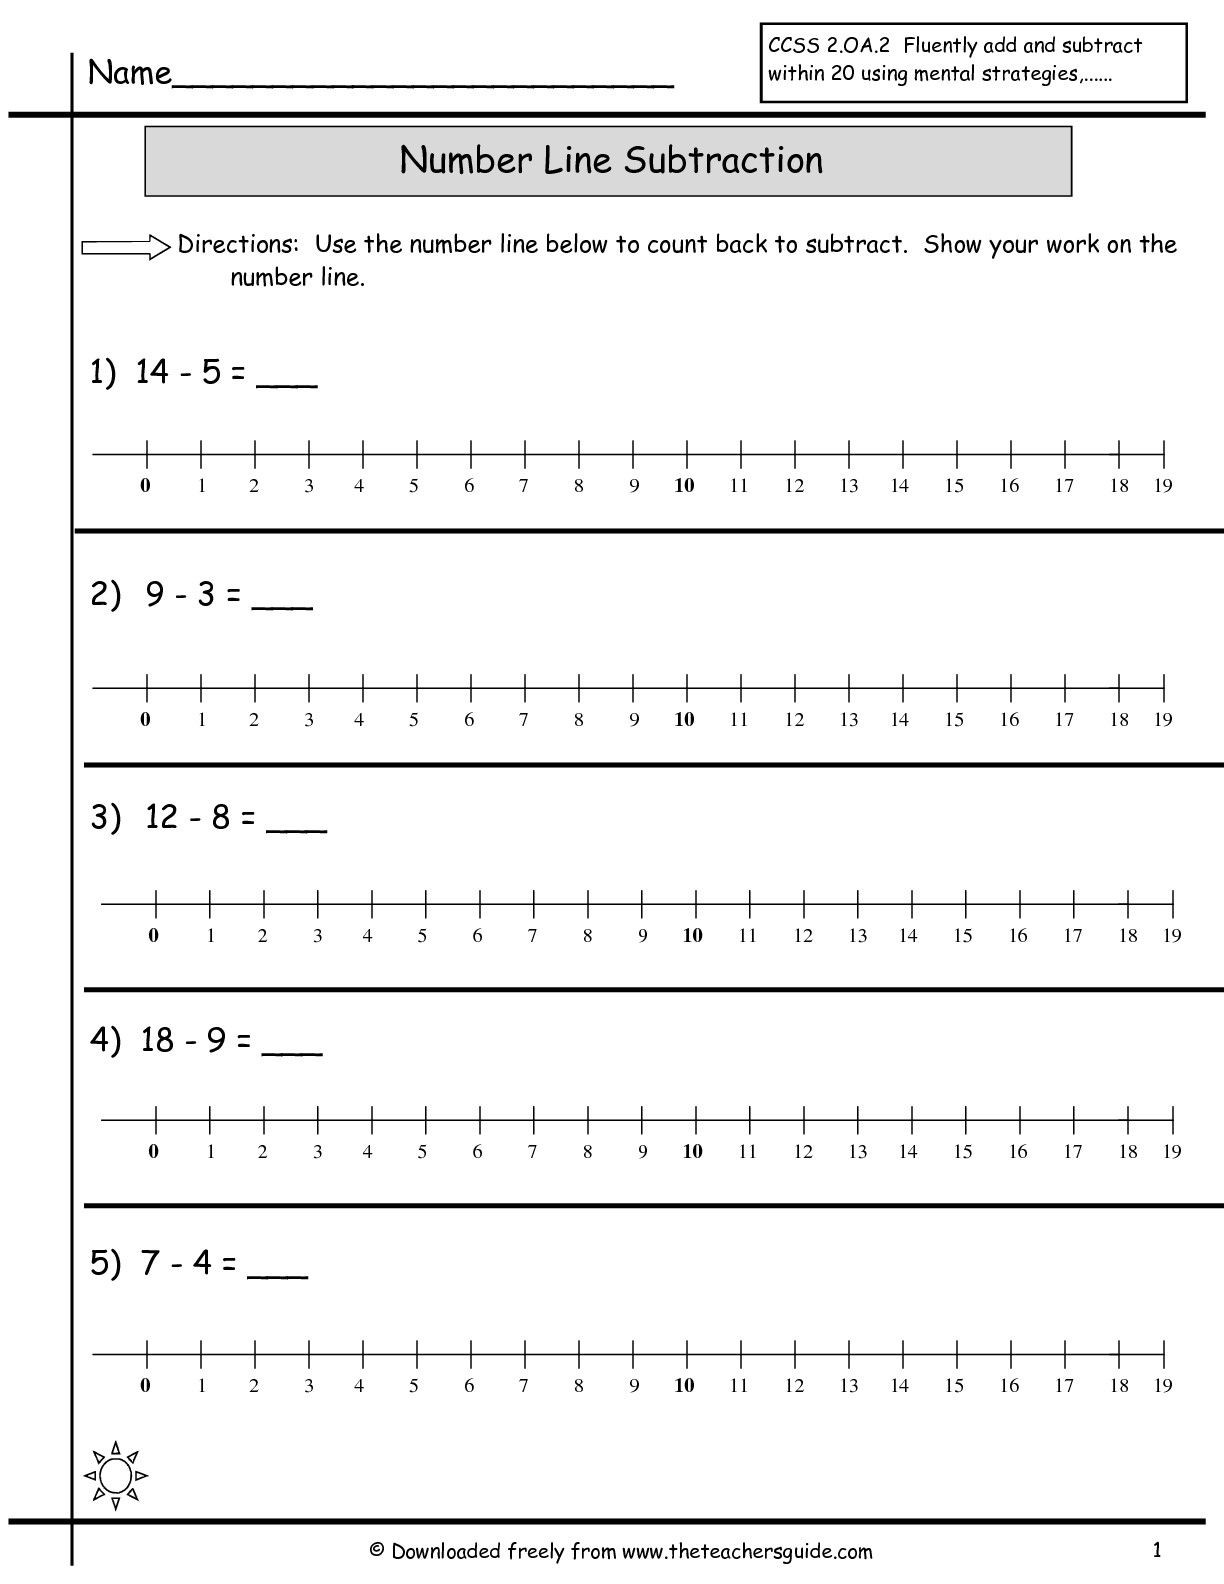 Free Math Worksheets Second Grade 2 Subtraction Subtraction Up to 20 No Regrouping